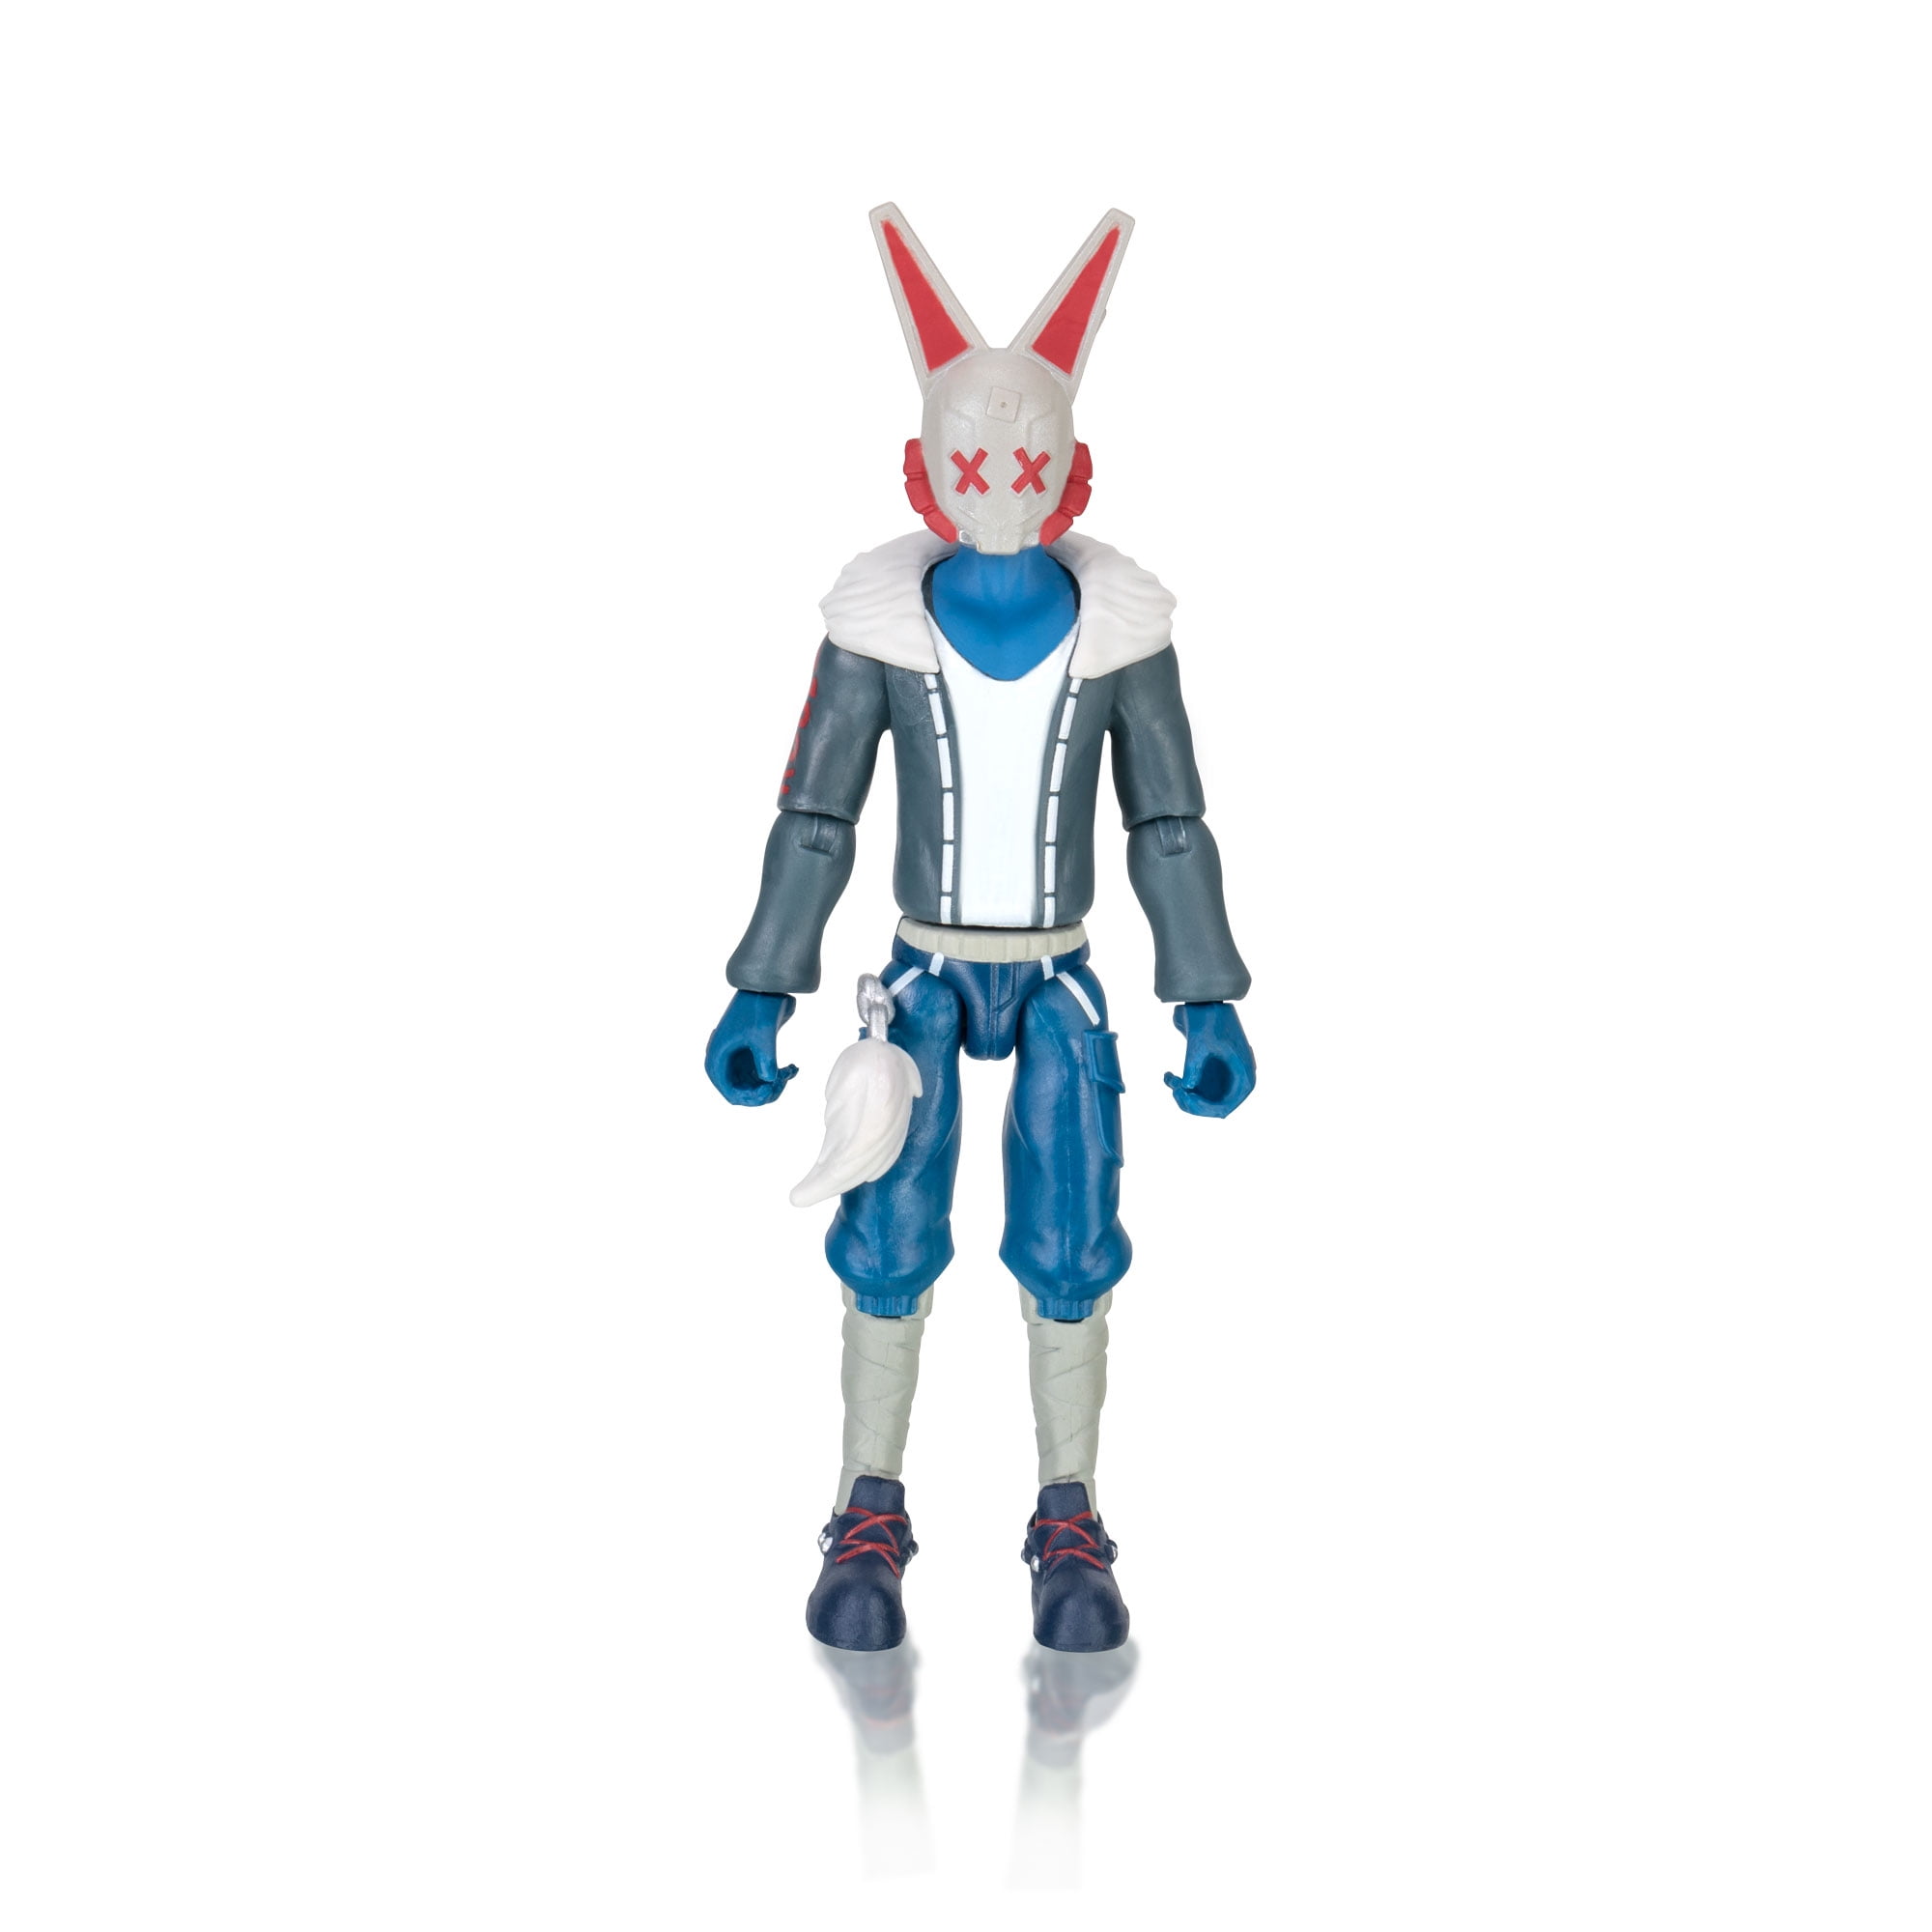 Roblox Imagination Collection The Usagi Figure Pack Includes Exclusive Virtual Item Walmart Com Walmart Com - roblox imagination event